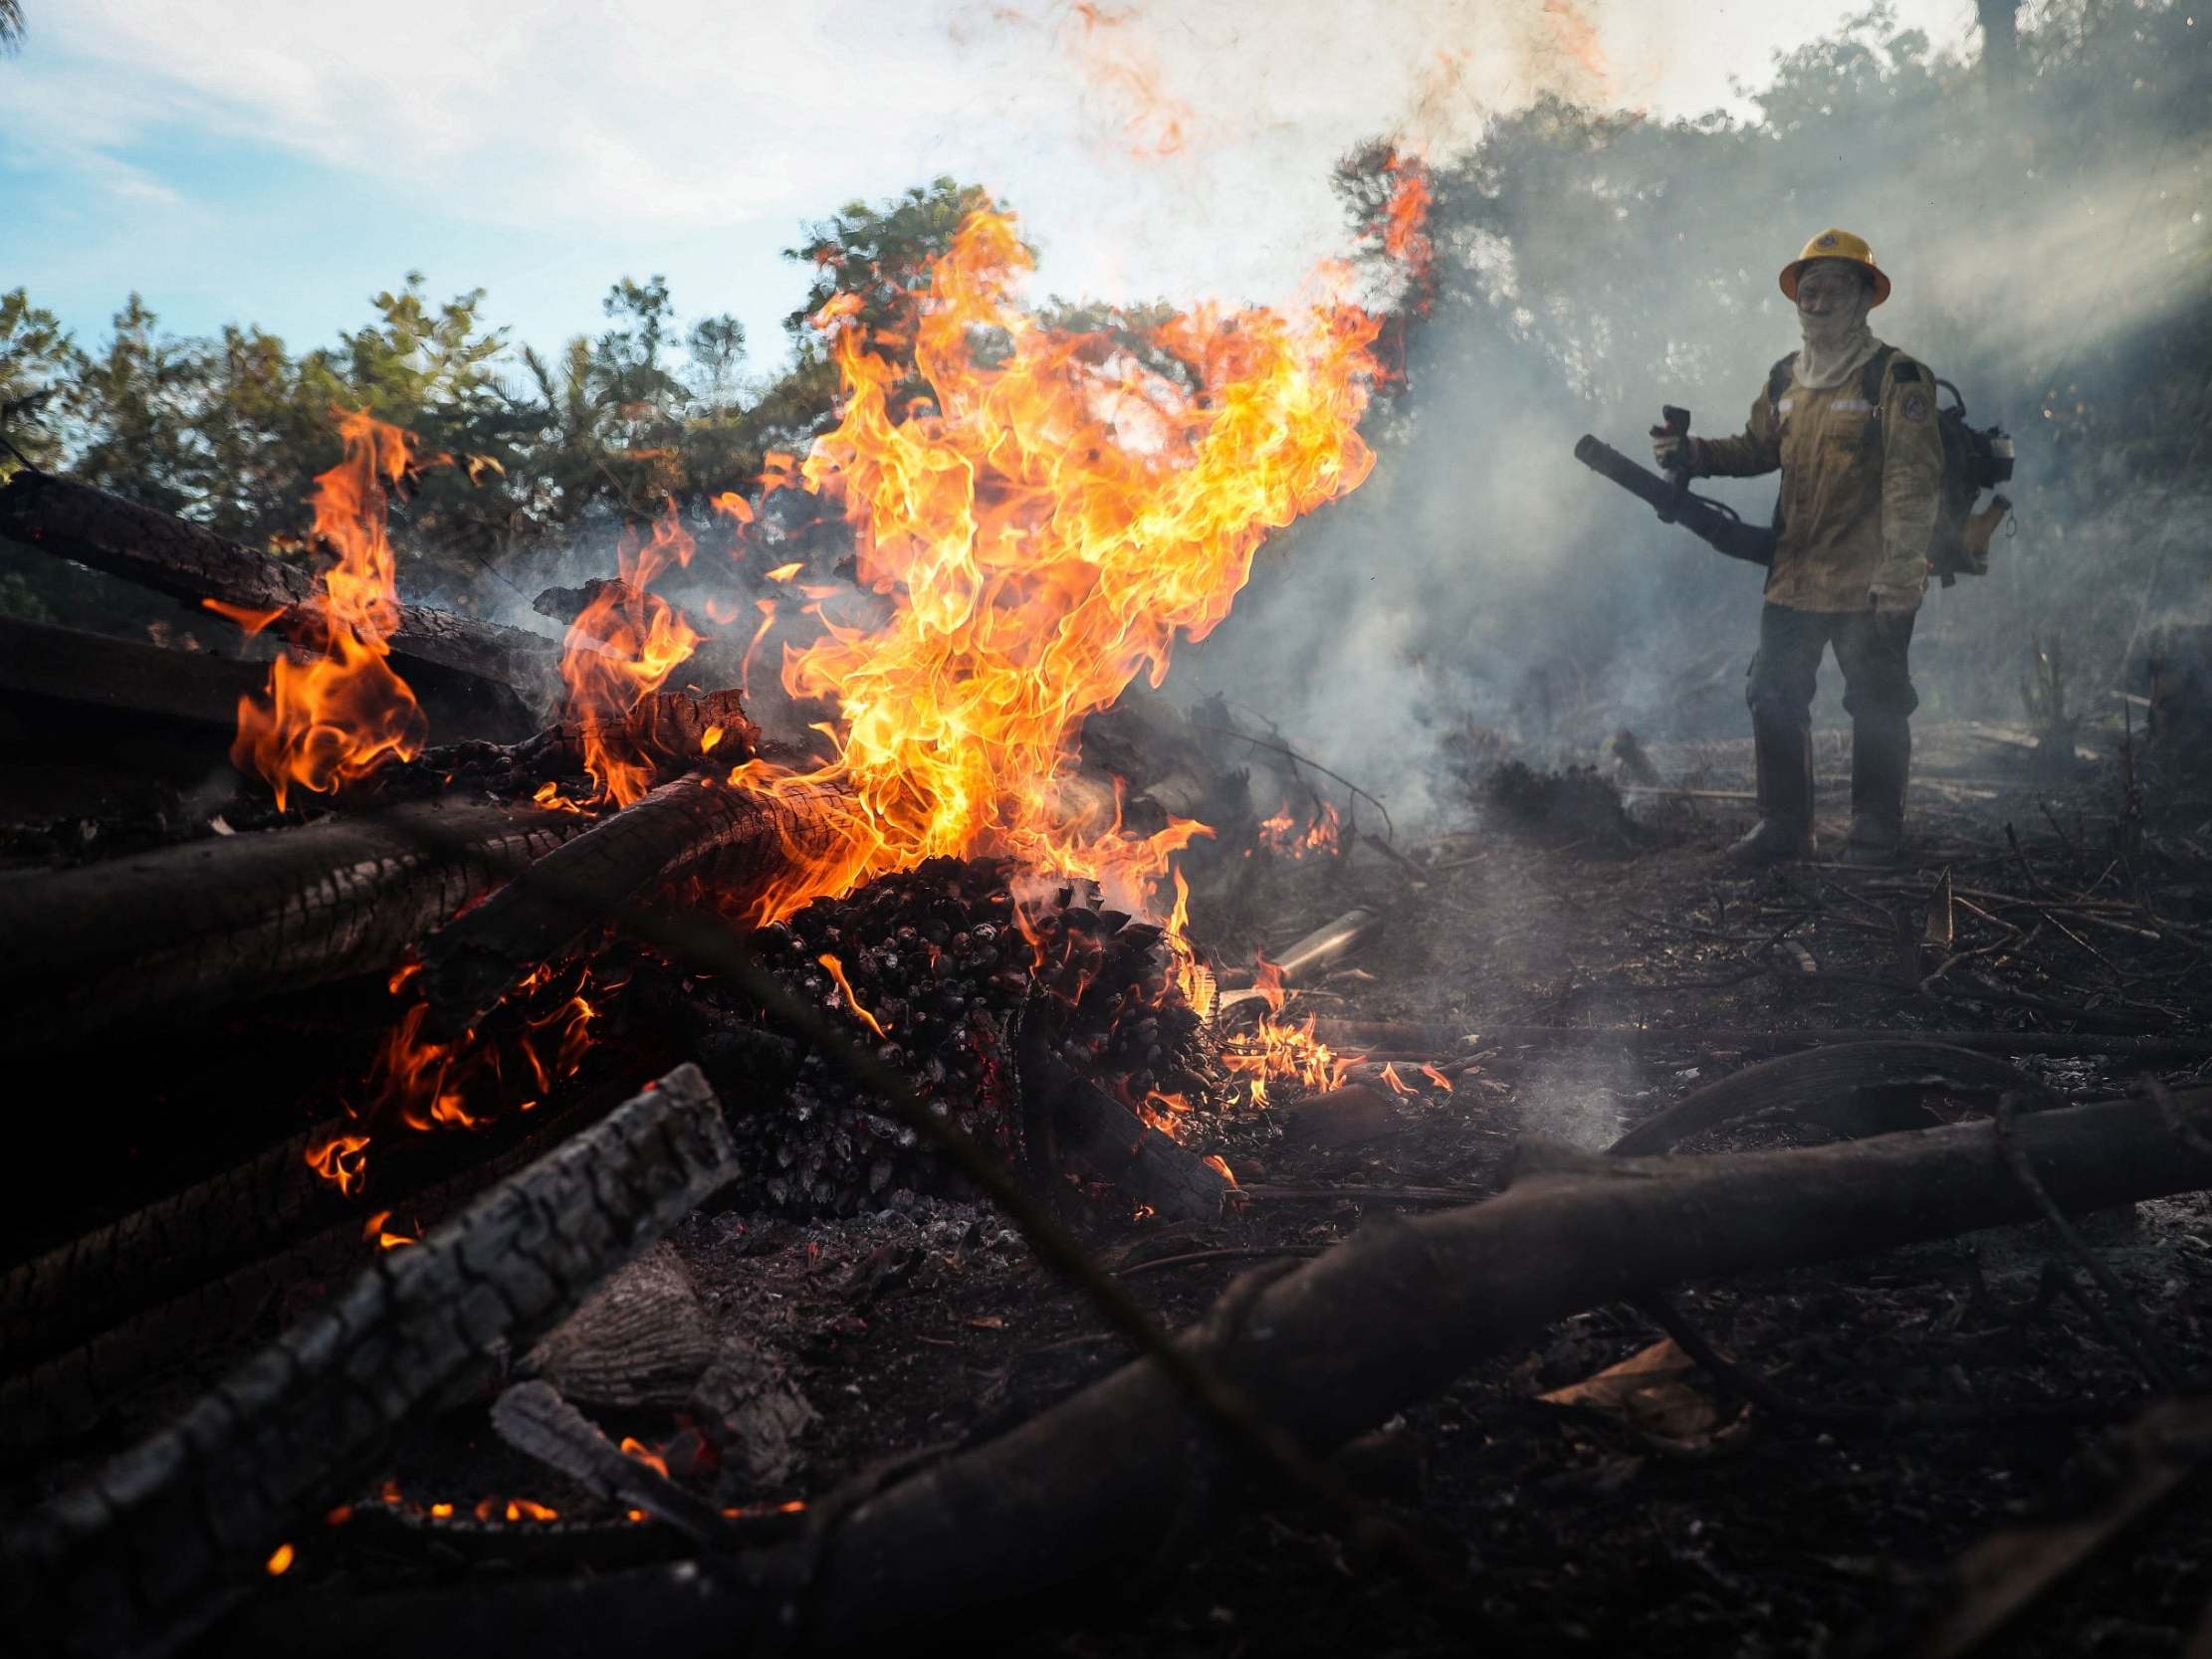 Prevfogo firefighters, an Ibama forest brigade formed by indigenous people of the Tenhari ethnic group, participate in fire fighting efforts in the Brazilian amazon